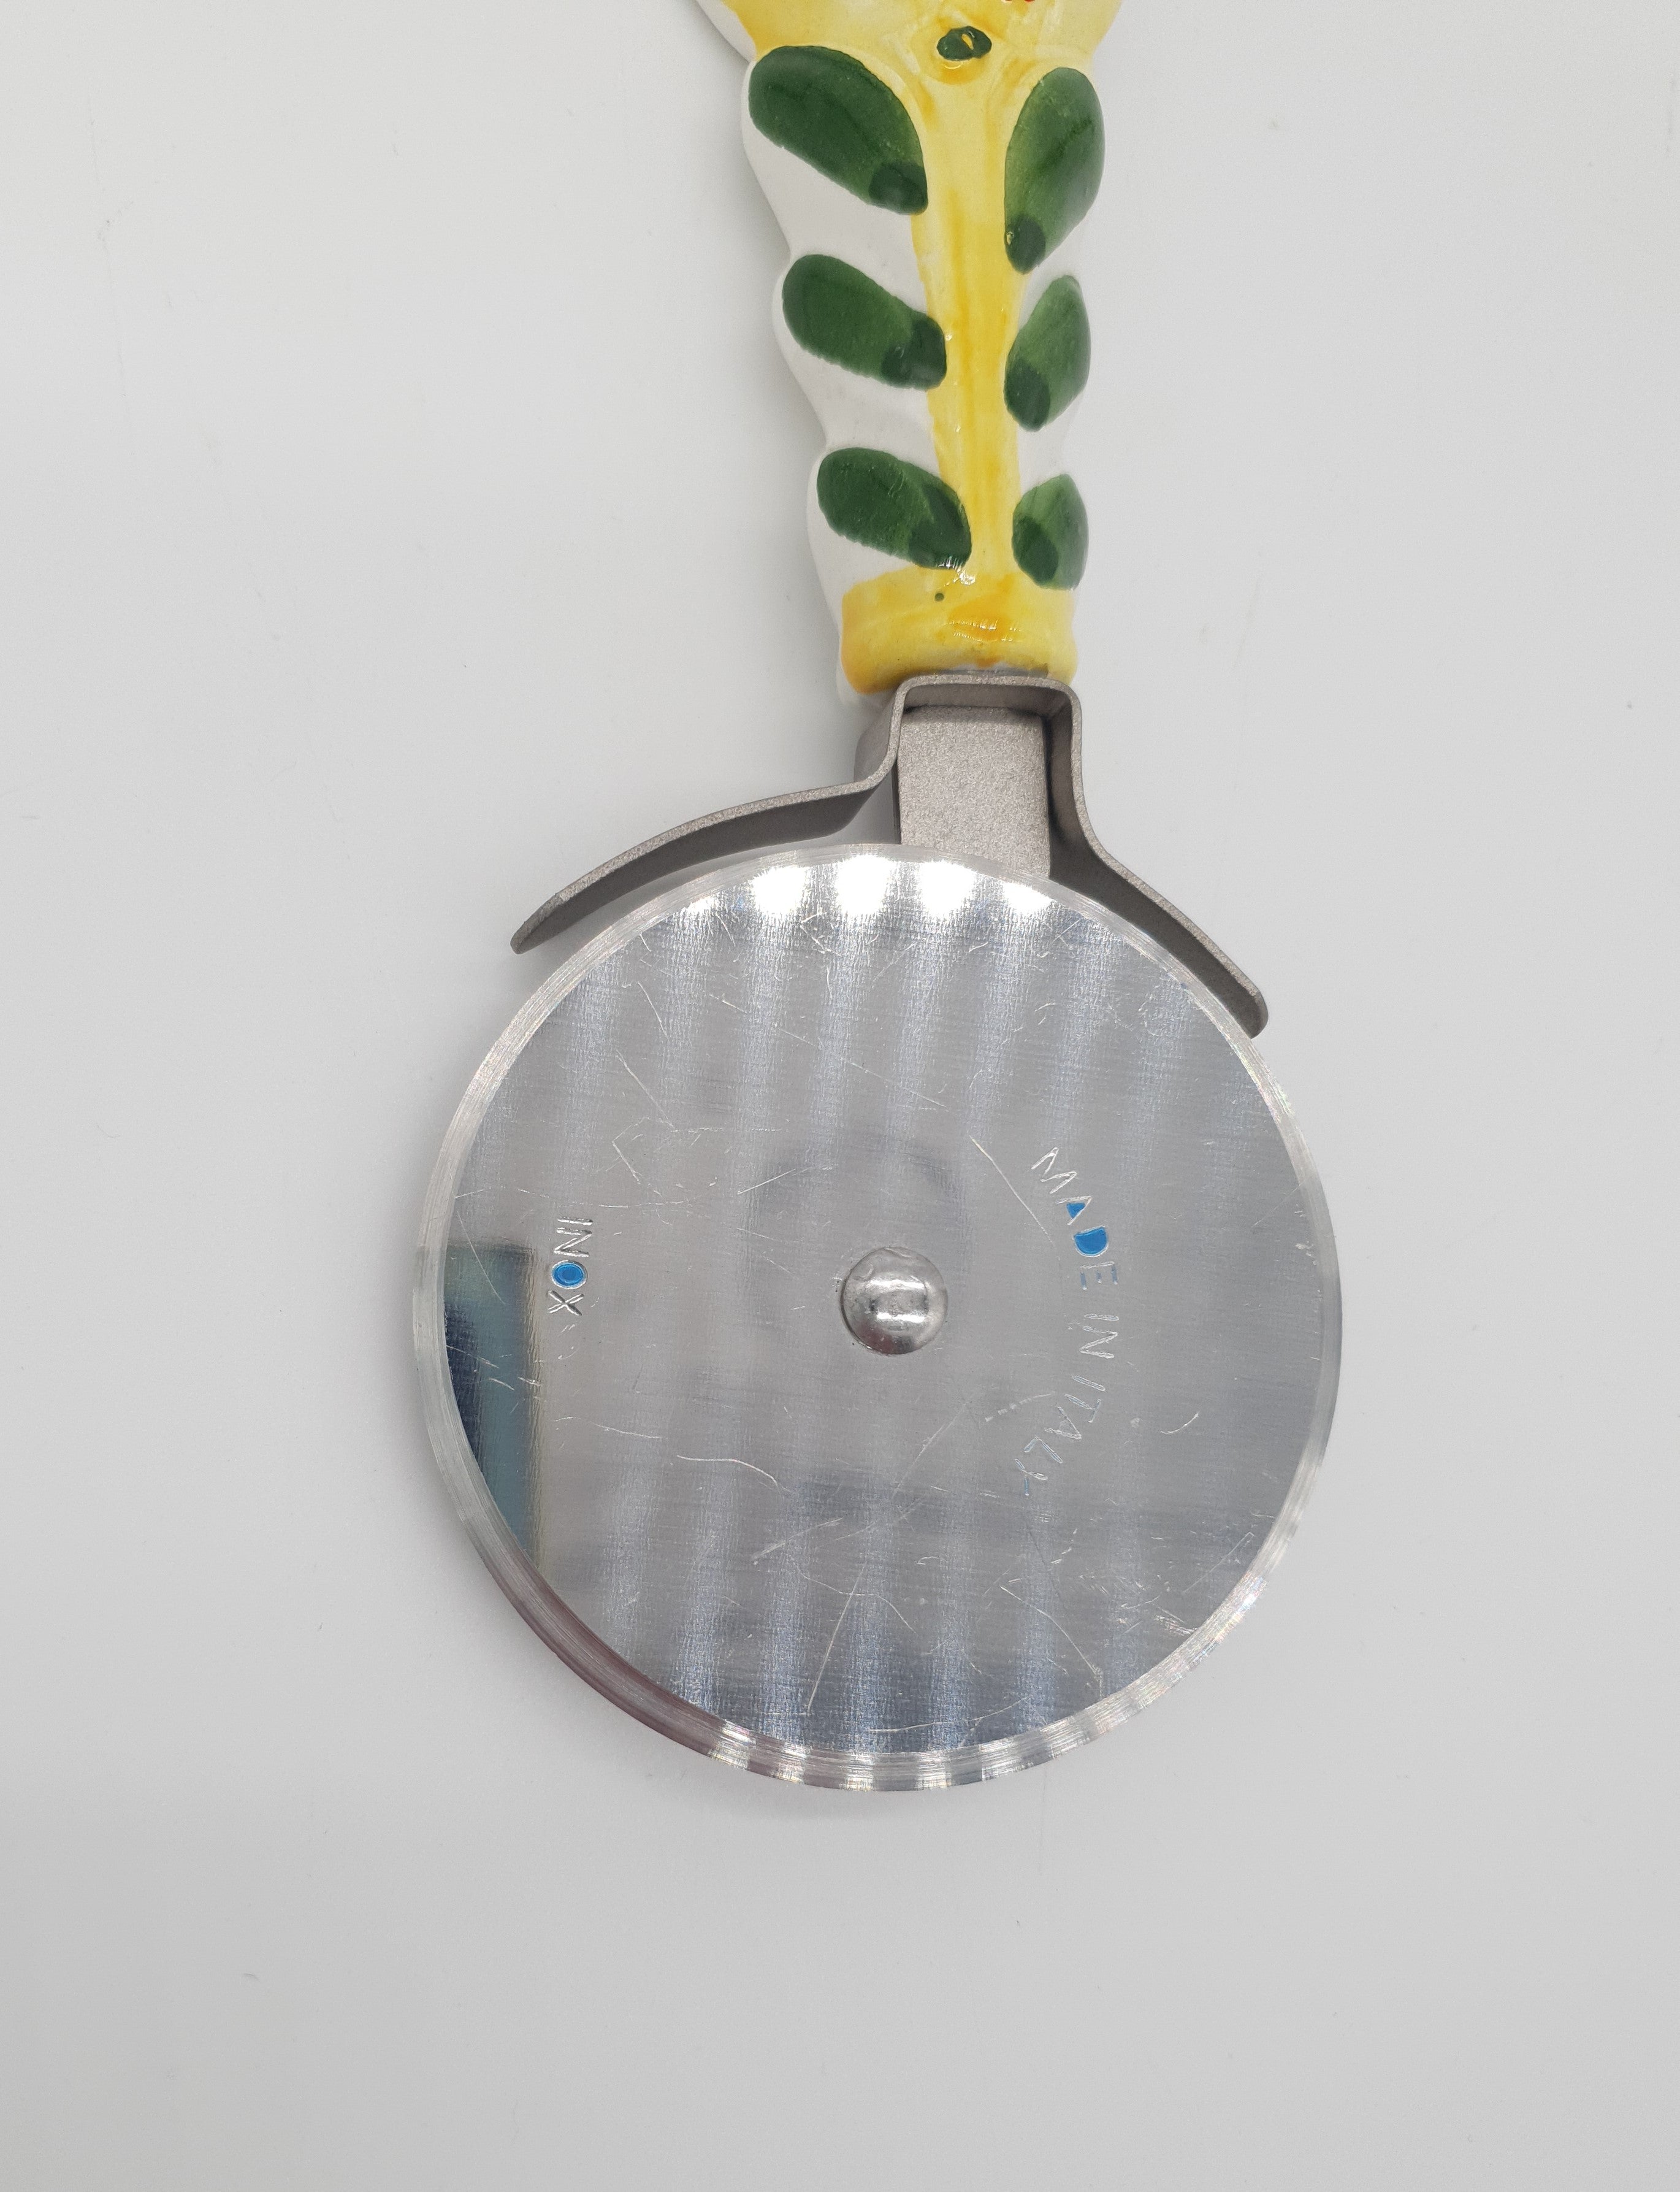 Wheel Pizza Cutter Pepper Decor Yellow Background Steel and Ceramic